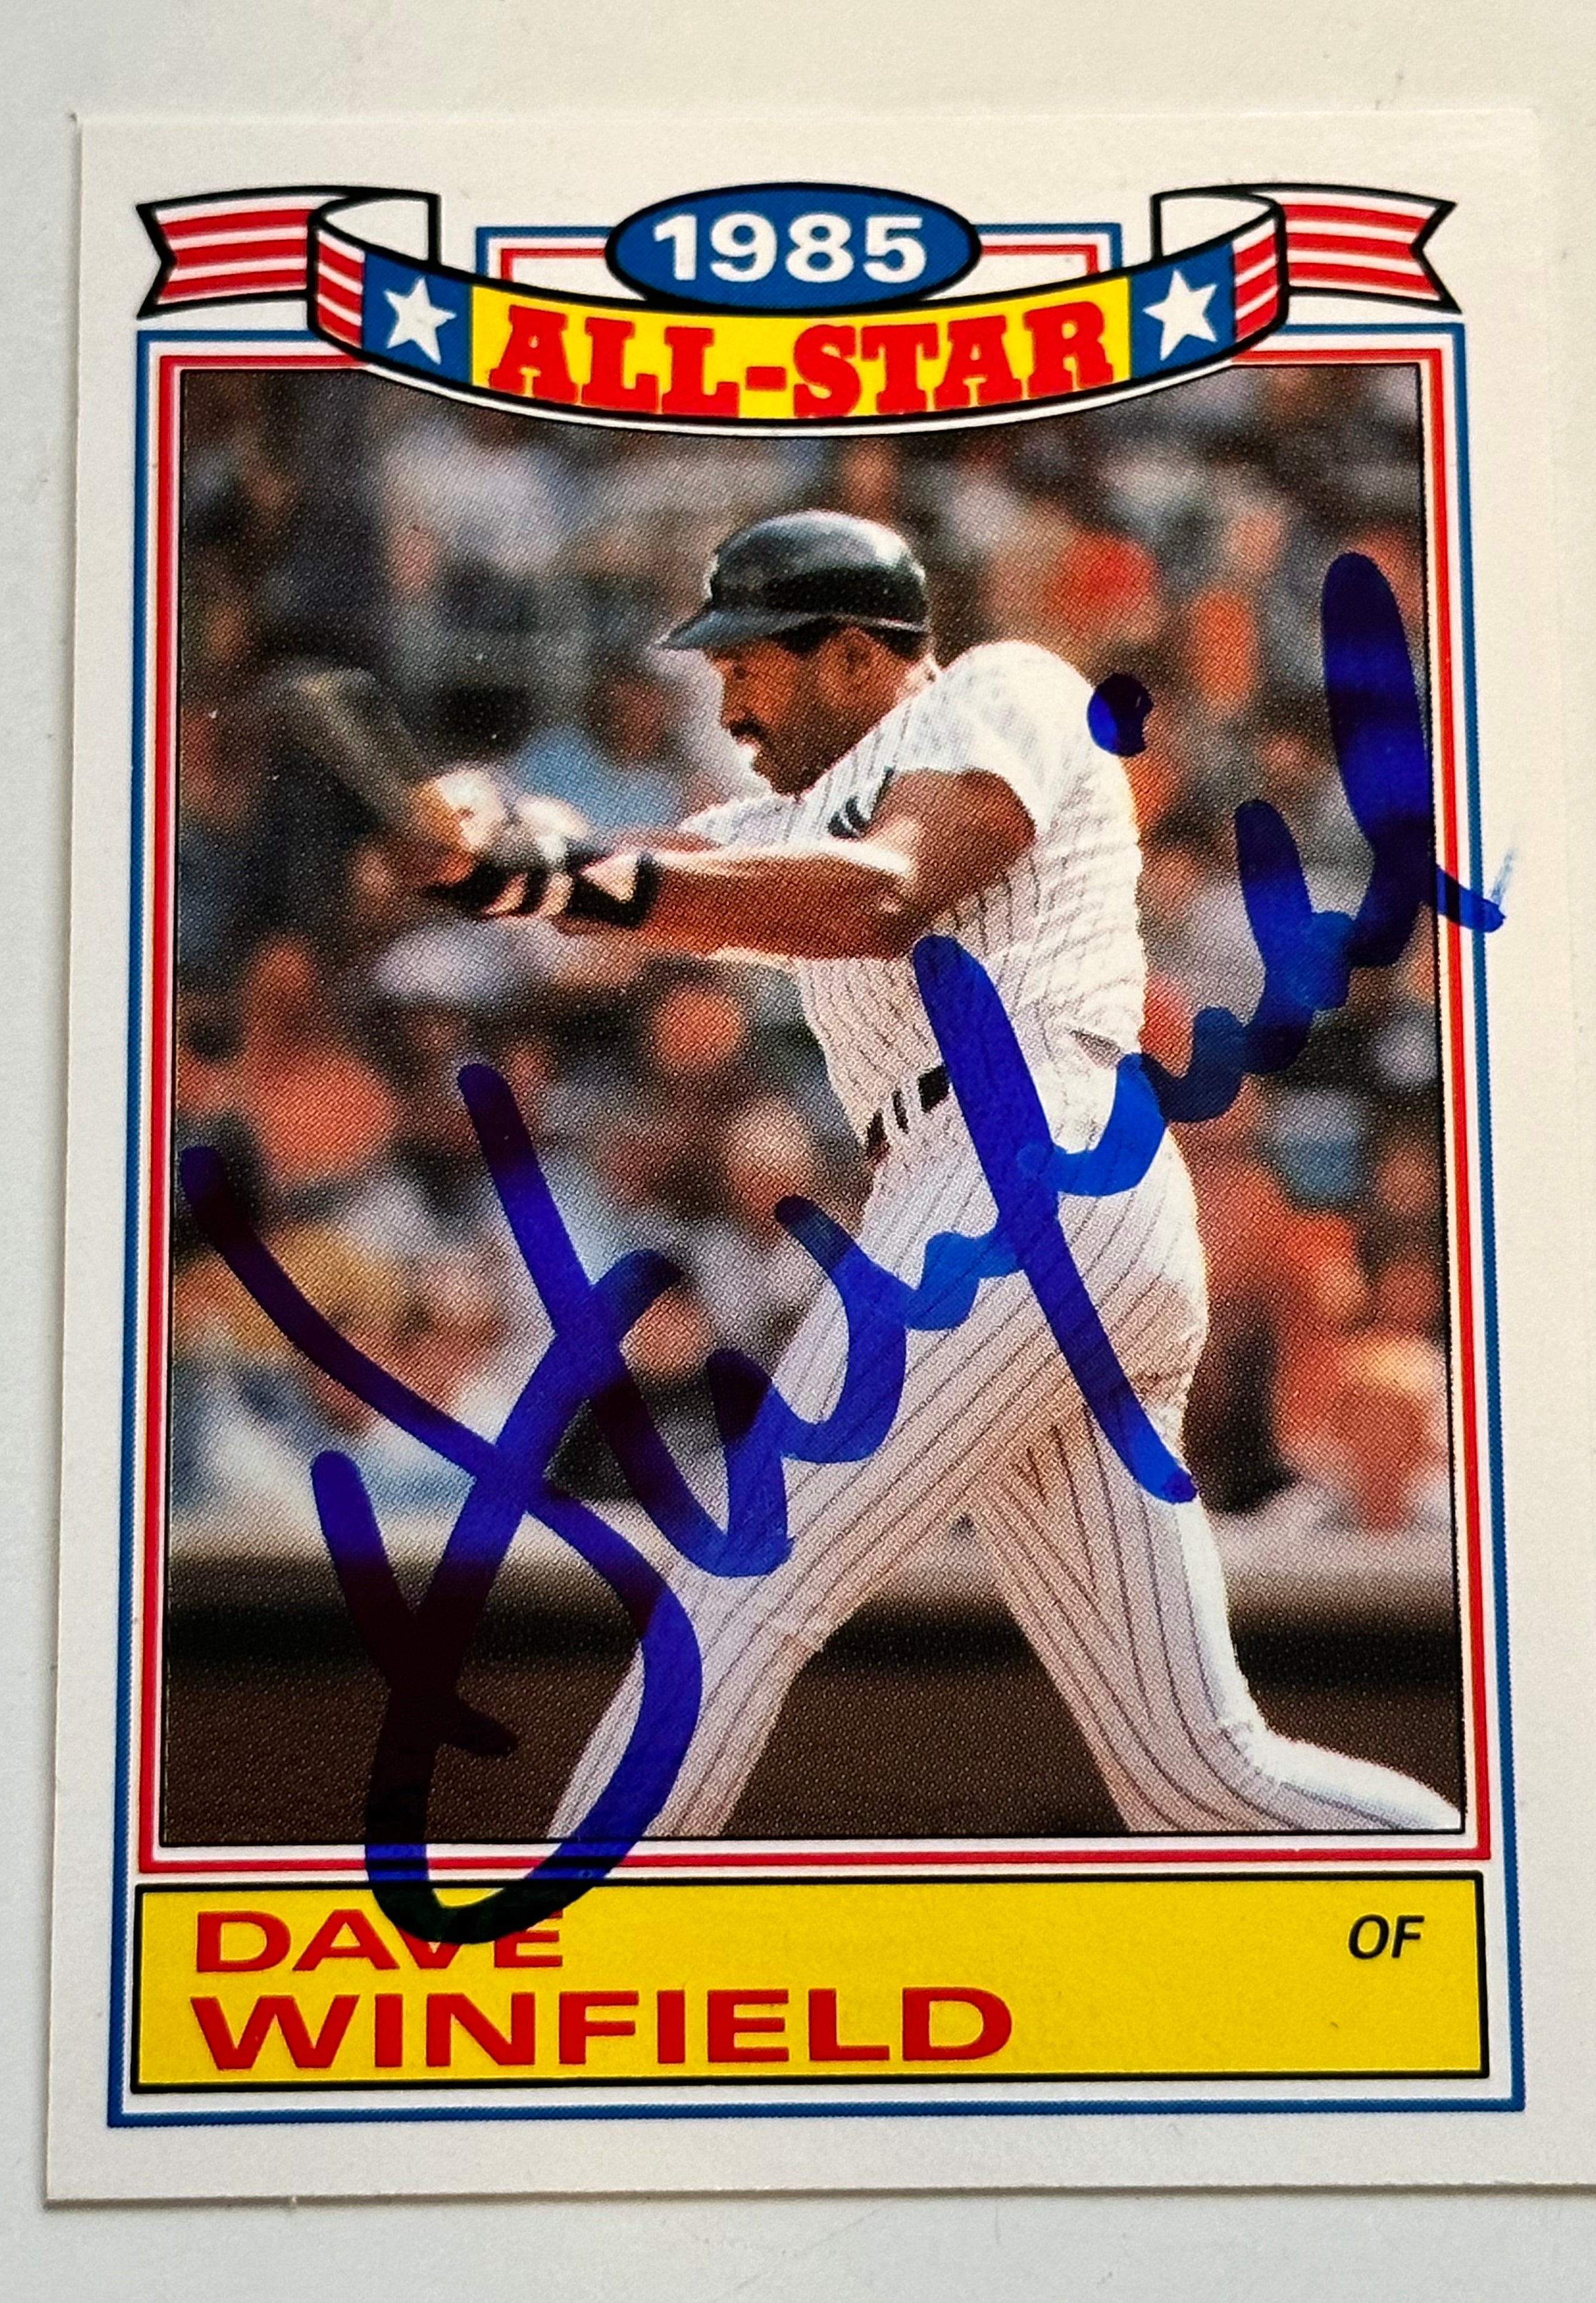 Dave Winfield All-Star insert signed in person autograph baseball card with COA